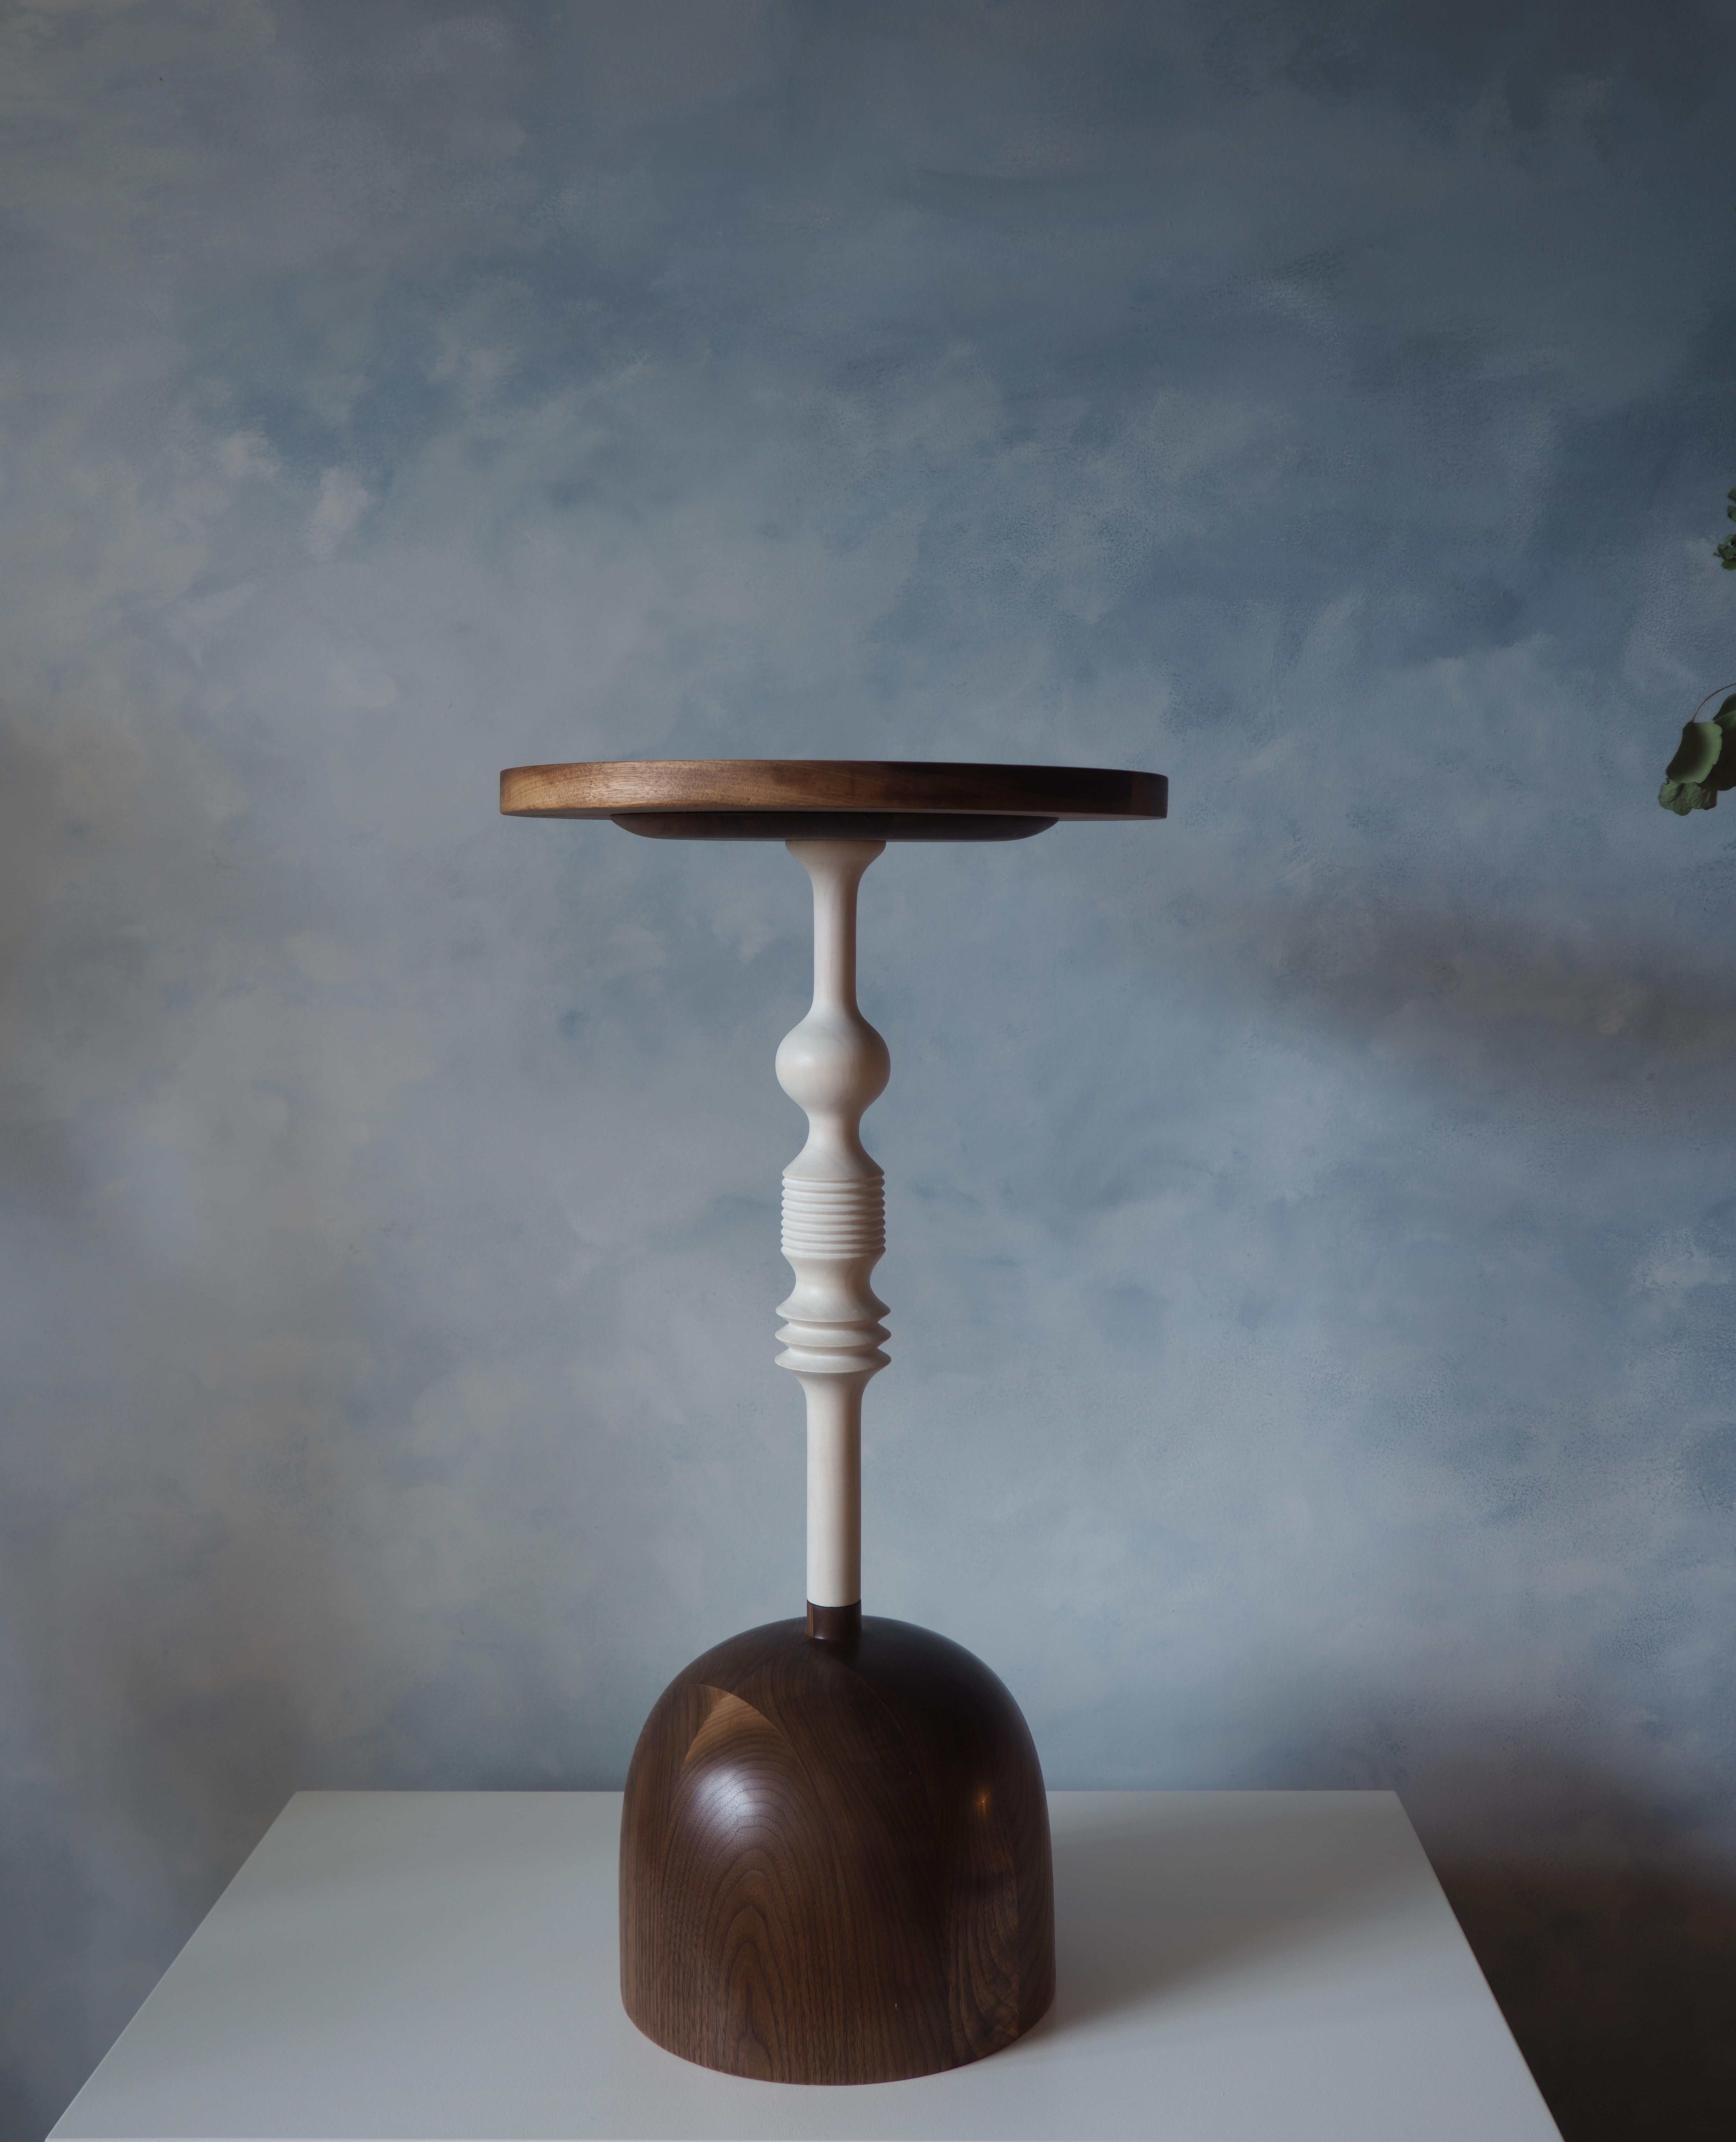 This elegant Walnut side table has been hand turned in our studio. The Maple stem is bleached and given a subtle white finish. The base is turned out of solid walnut and finished with a oil wax blend.

The table top has a ridge to help secure your